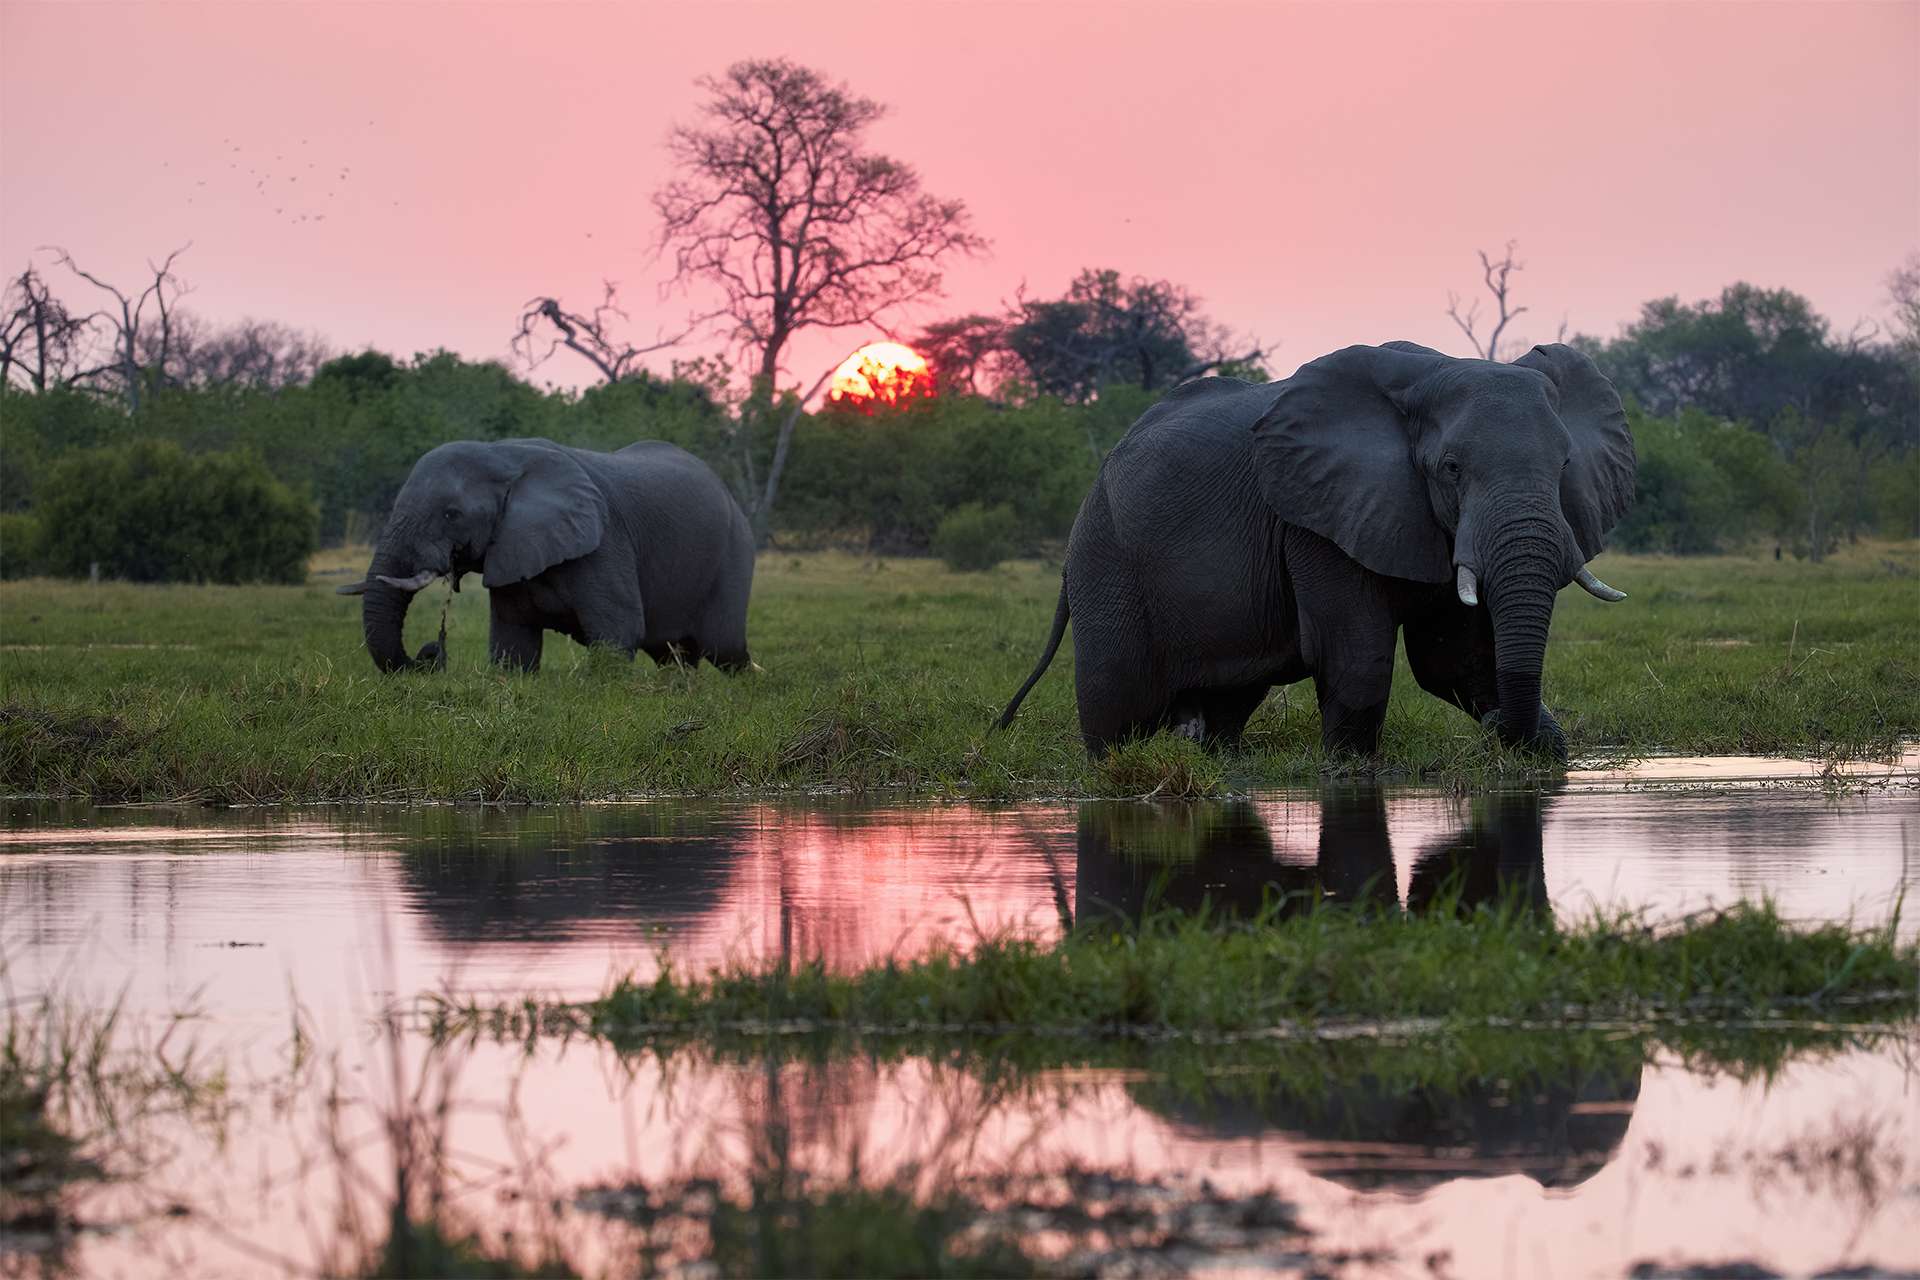 Sunset in the Okavango Delta wilderness, Botswana. Two African elephants, Loxodonta in the river Khwai against a red sunset reflected on the water surface. Safari animals concept.